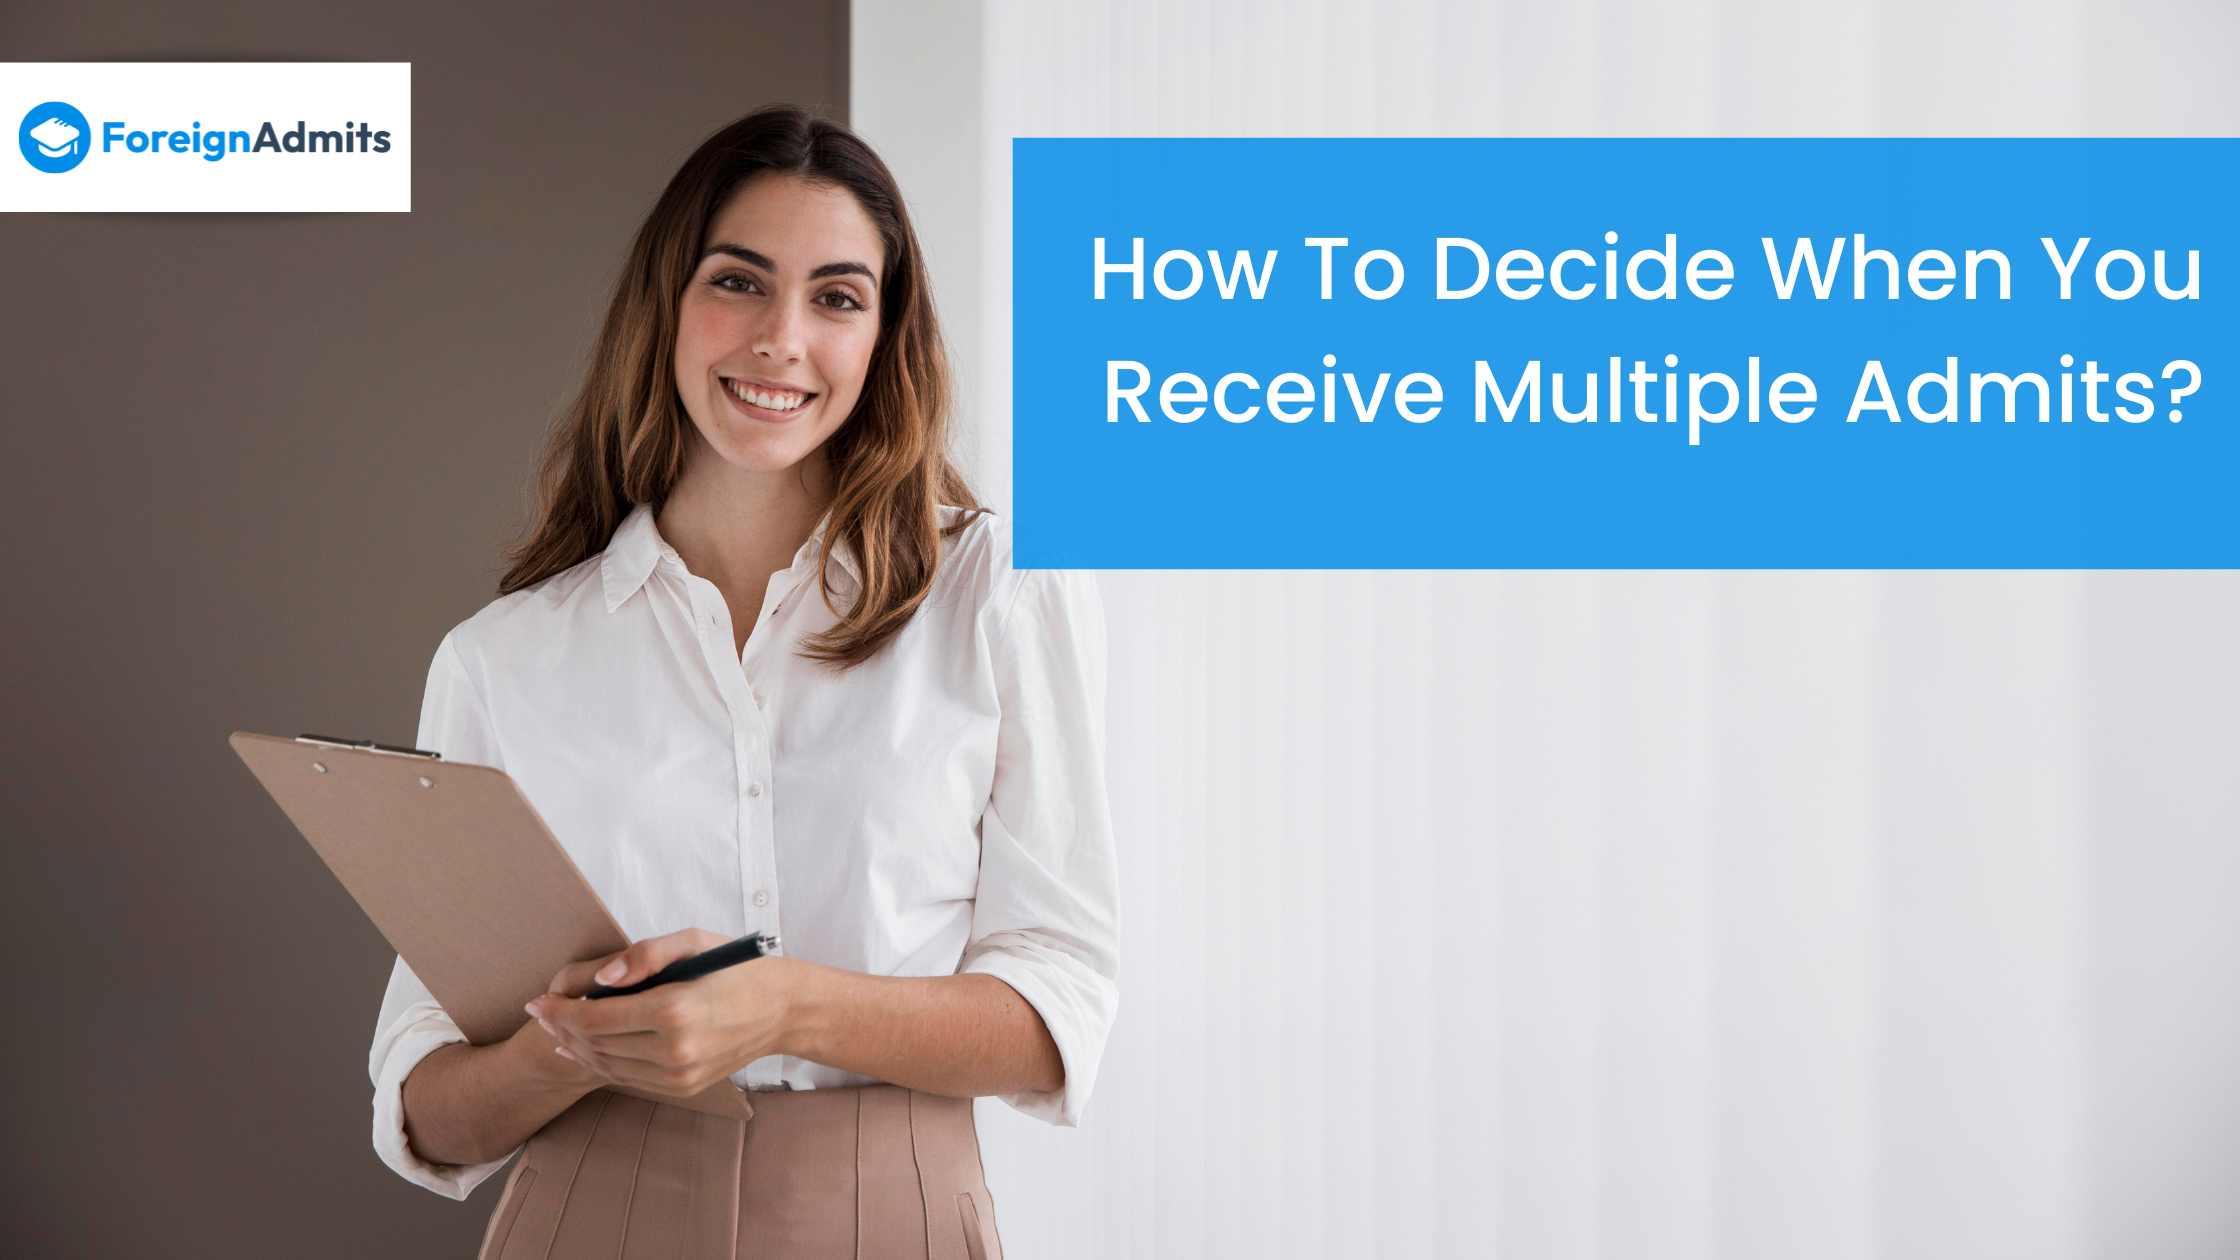 How To Decide When You Receive Multiple Admissions?